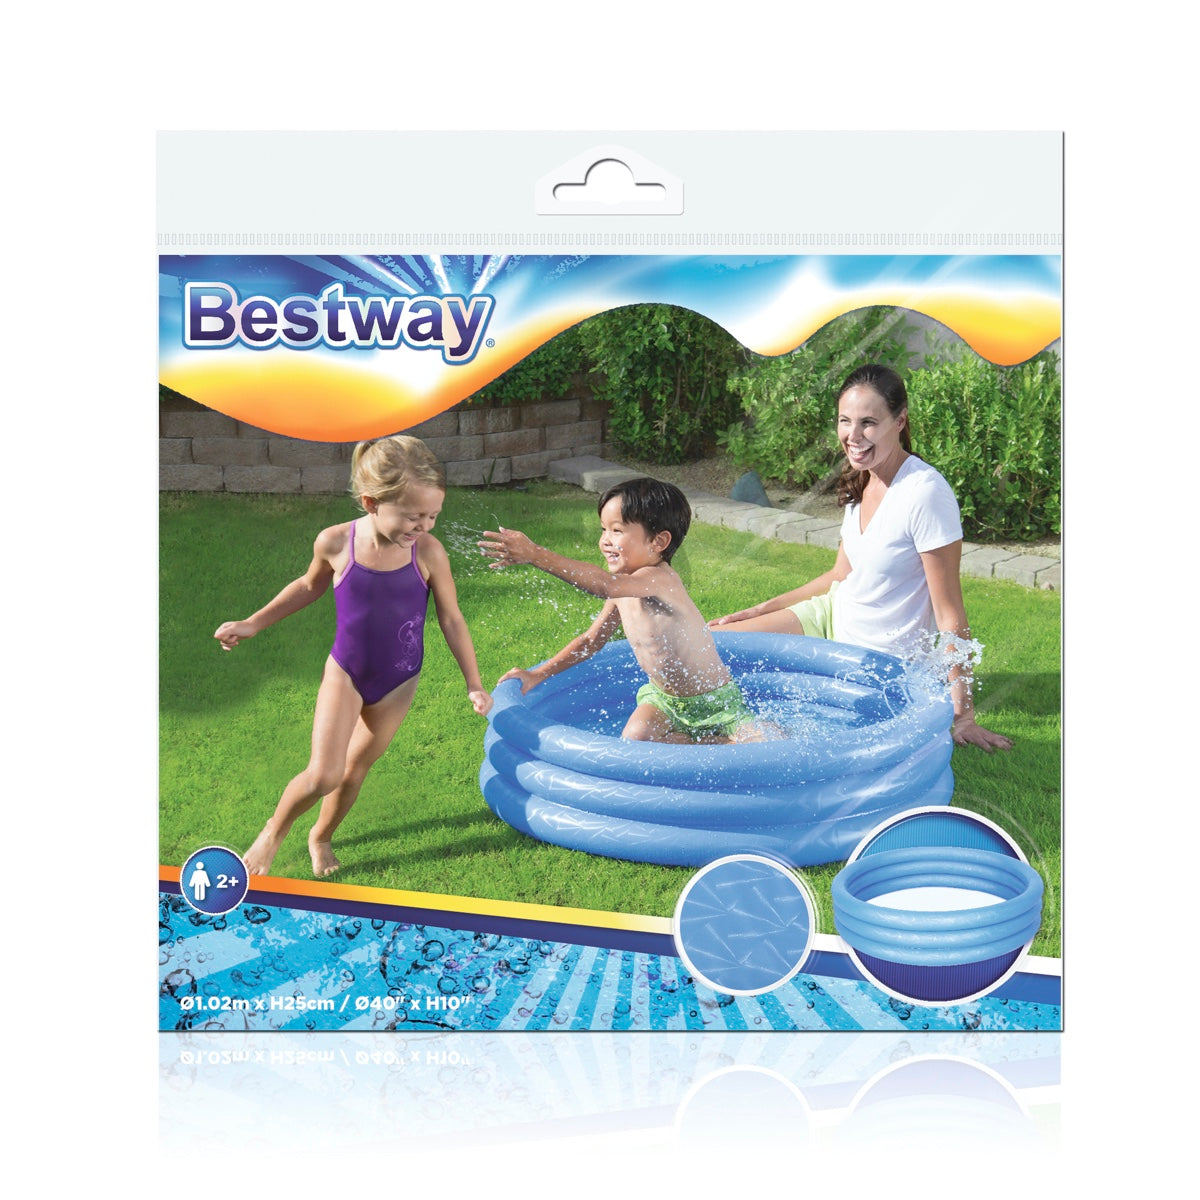 Piscina Inflable Bestway 3 Anillos Colores 1.02m x 25cm